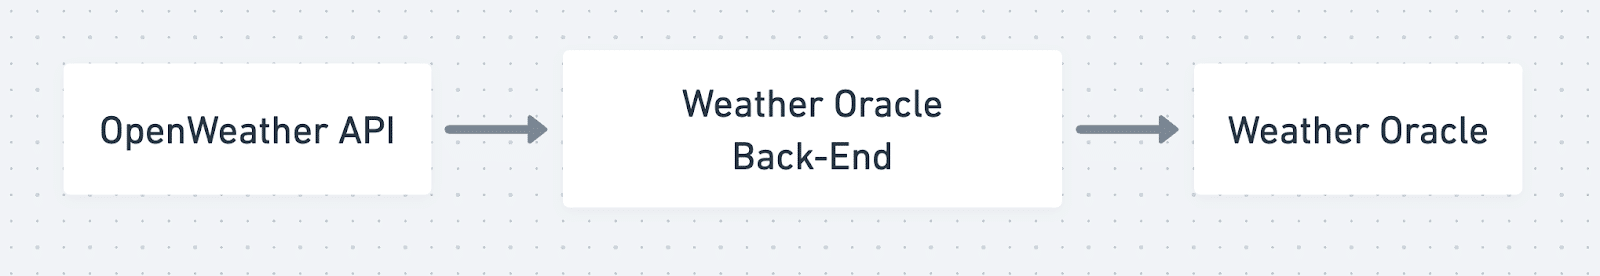 Sui-Weather-Oracle-delivering-up-to-date-weather-information.